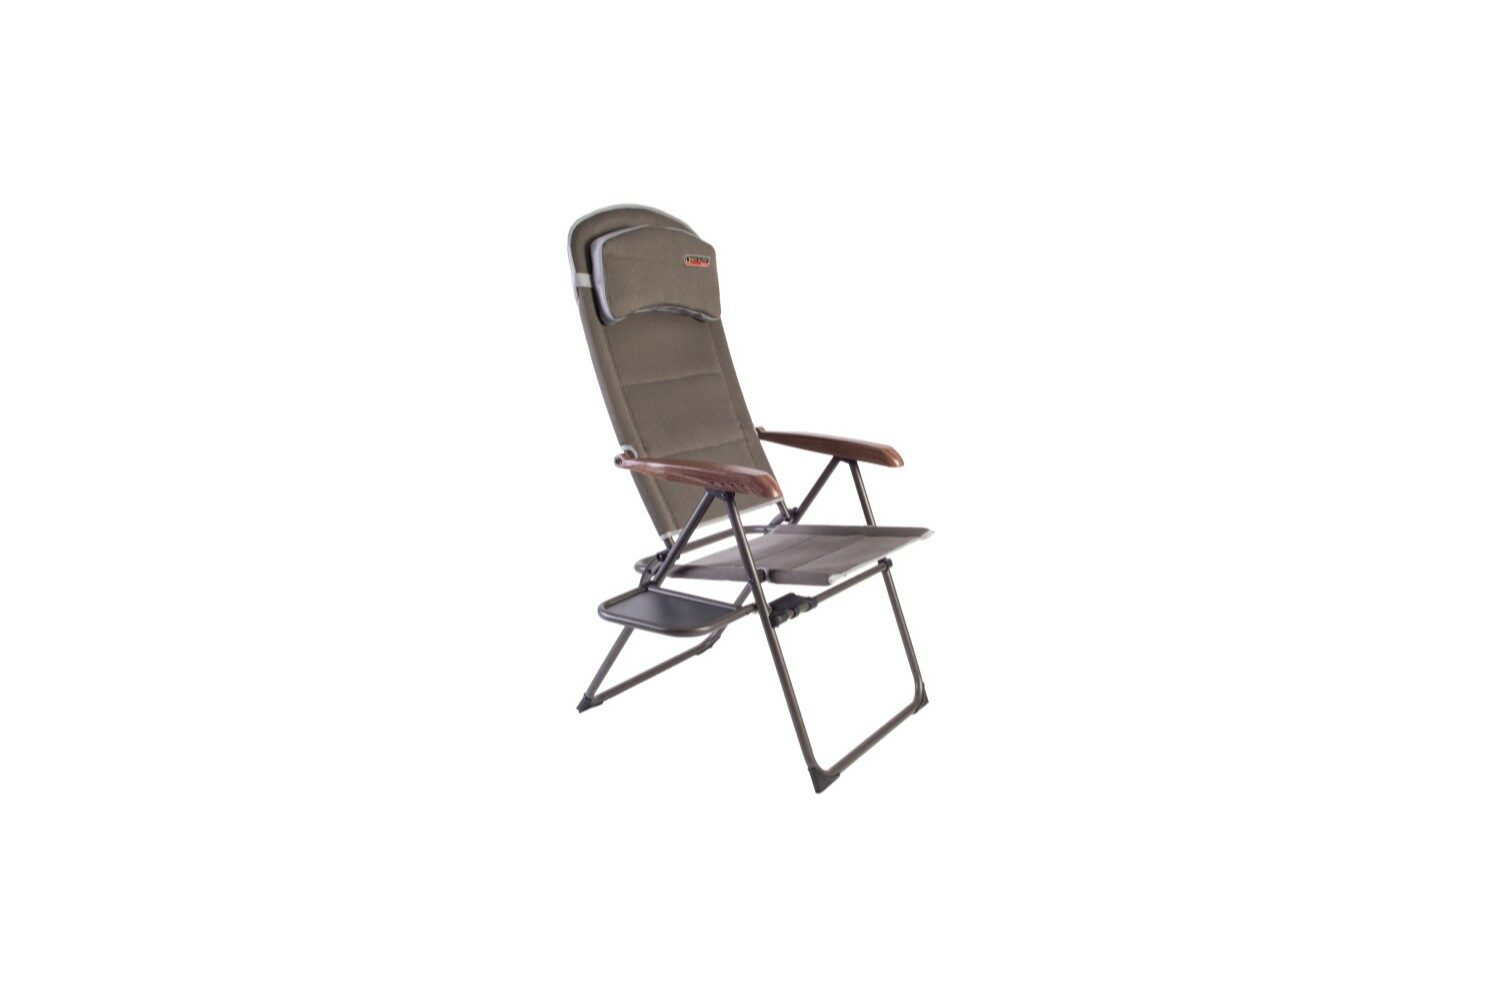 Quest Camping Caravan Garden Naples Pro RECLINE Chair with Table F133015 2019 